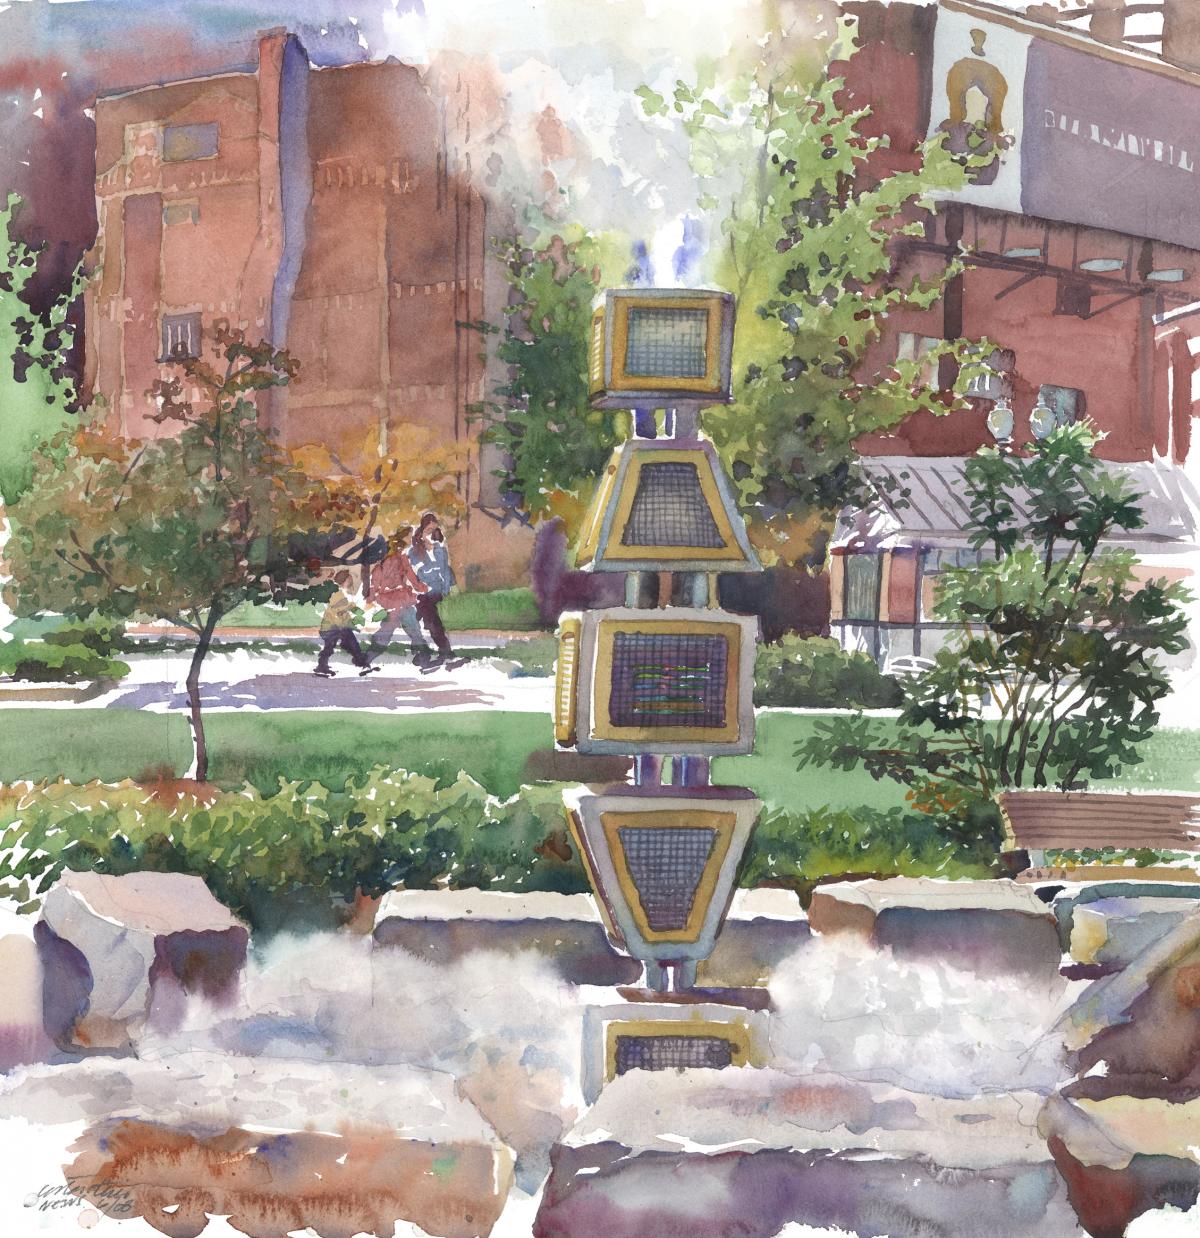 Harbor Fog Sculpture - RFK Greenway - en plein air watercolor landscape painting with sculpture by Frank Costantino